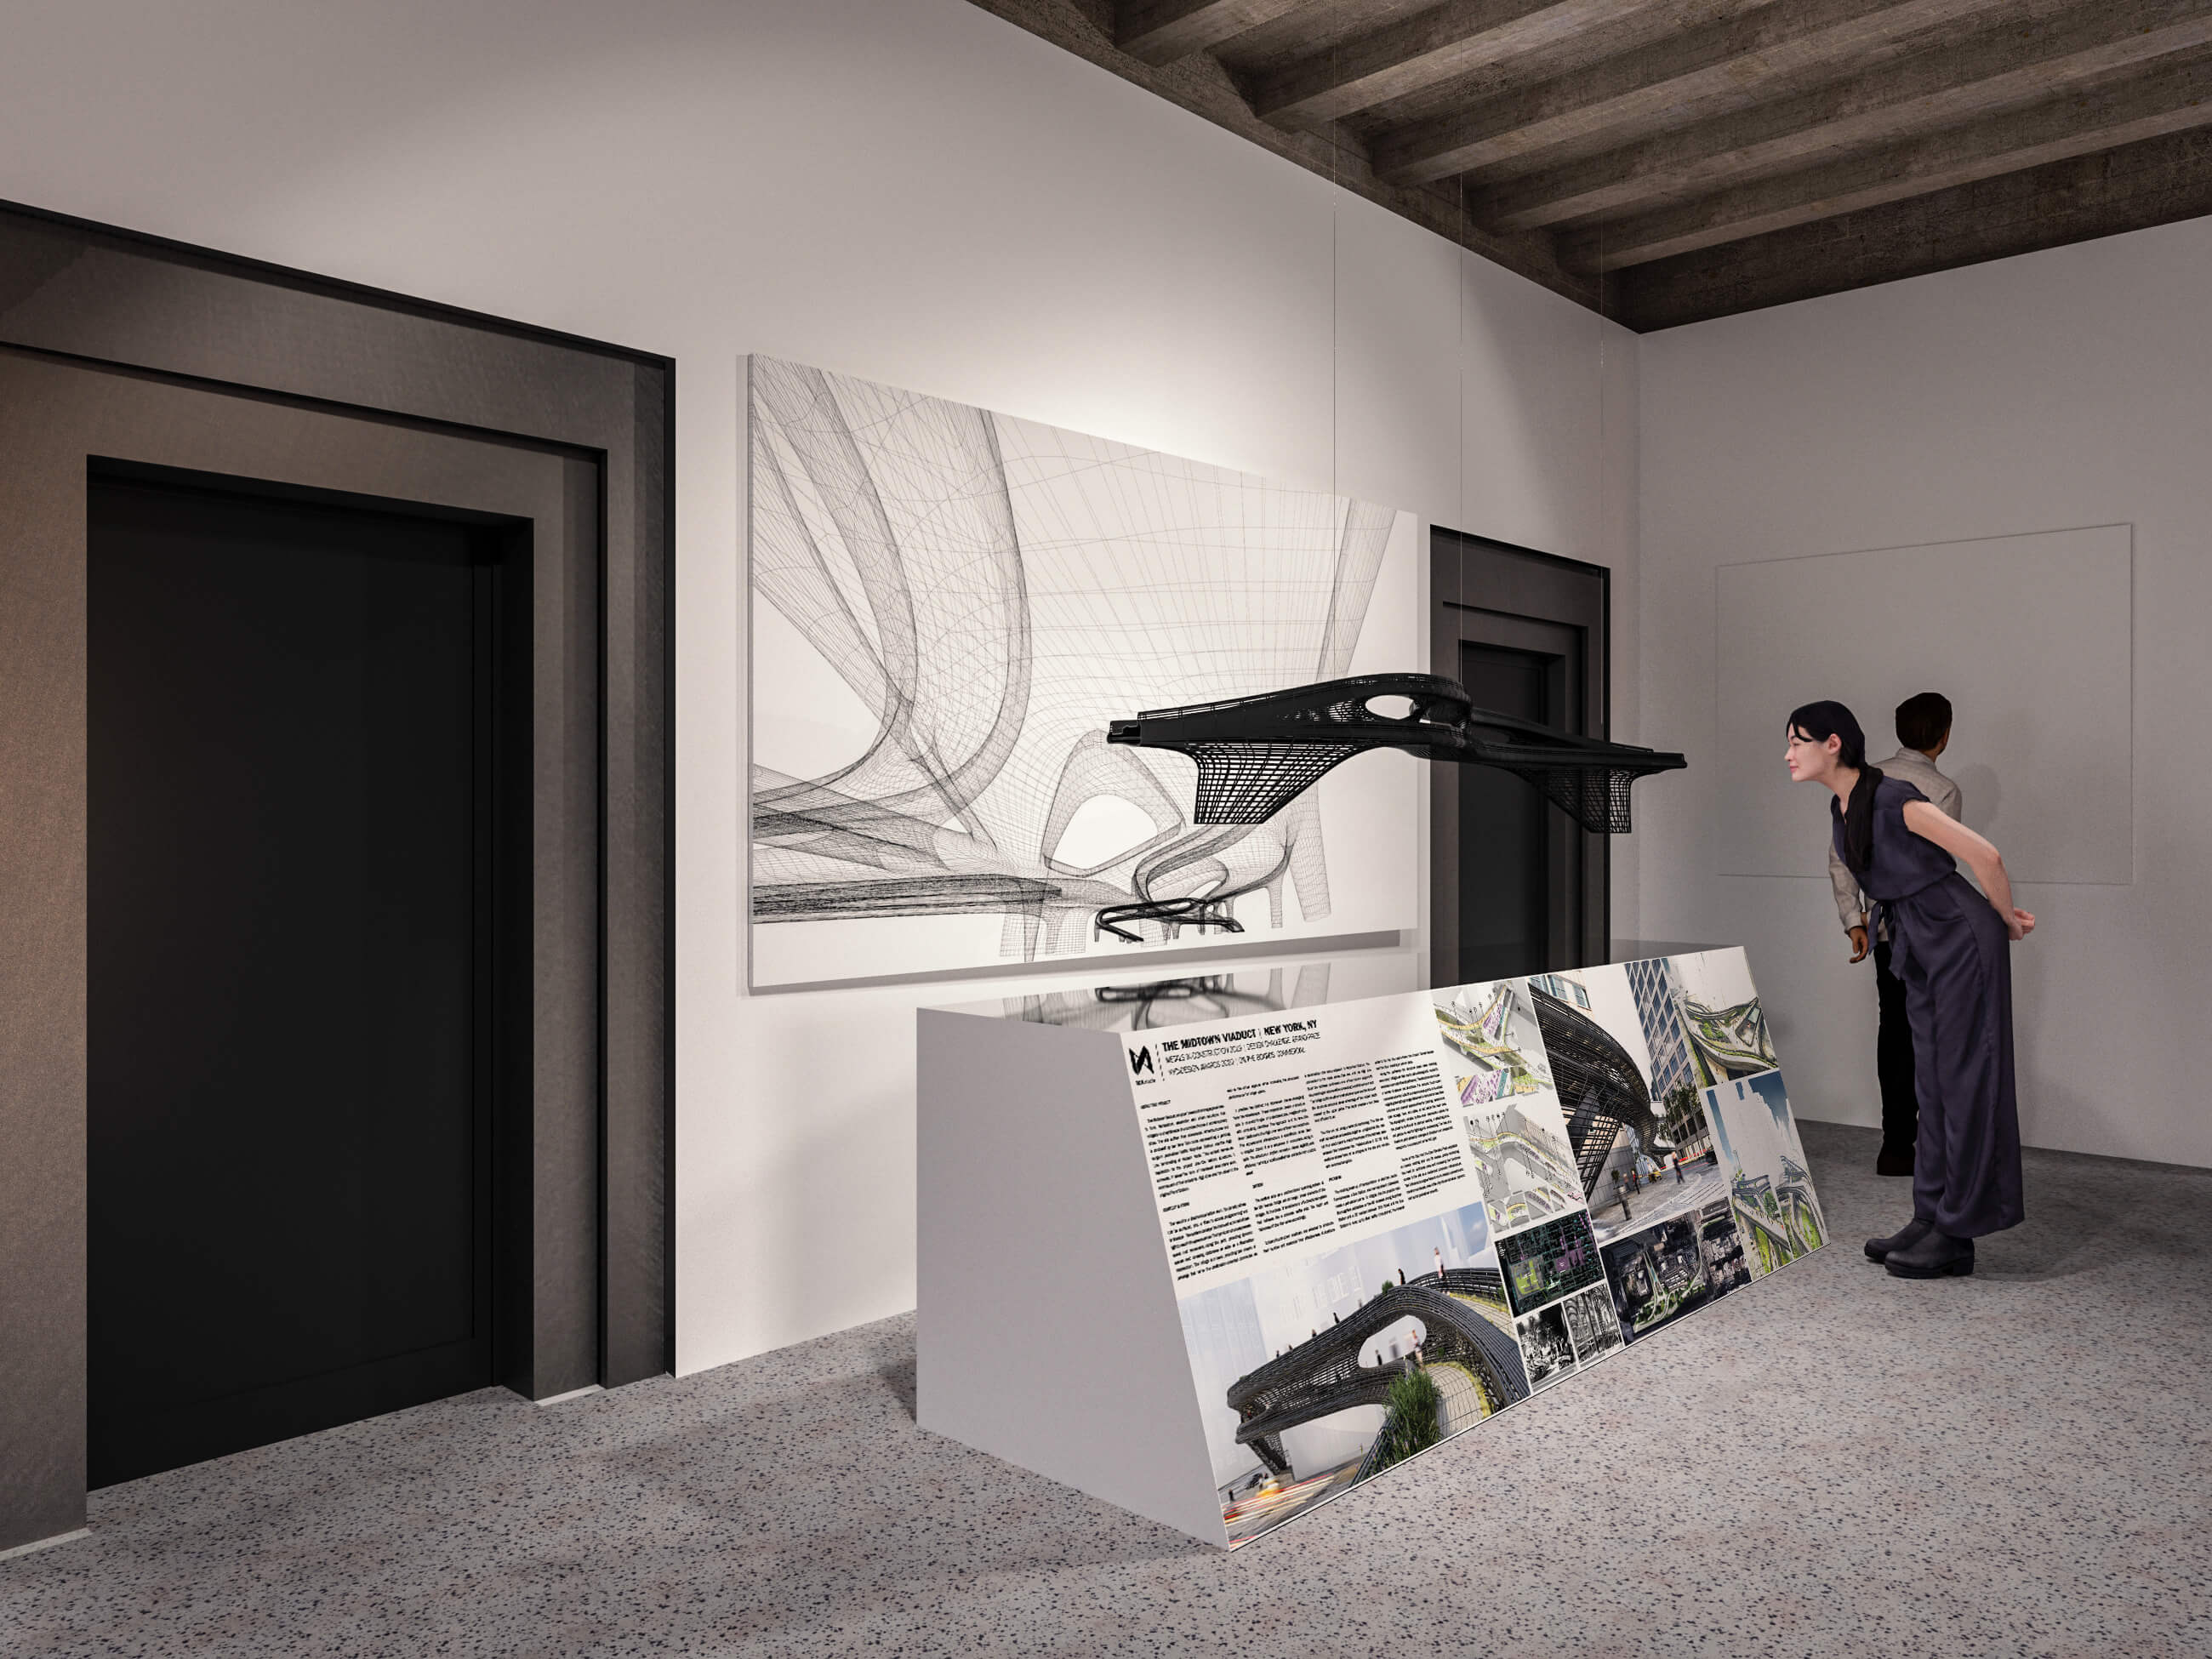 Interior rendering of a bridge suspended in a gallery space